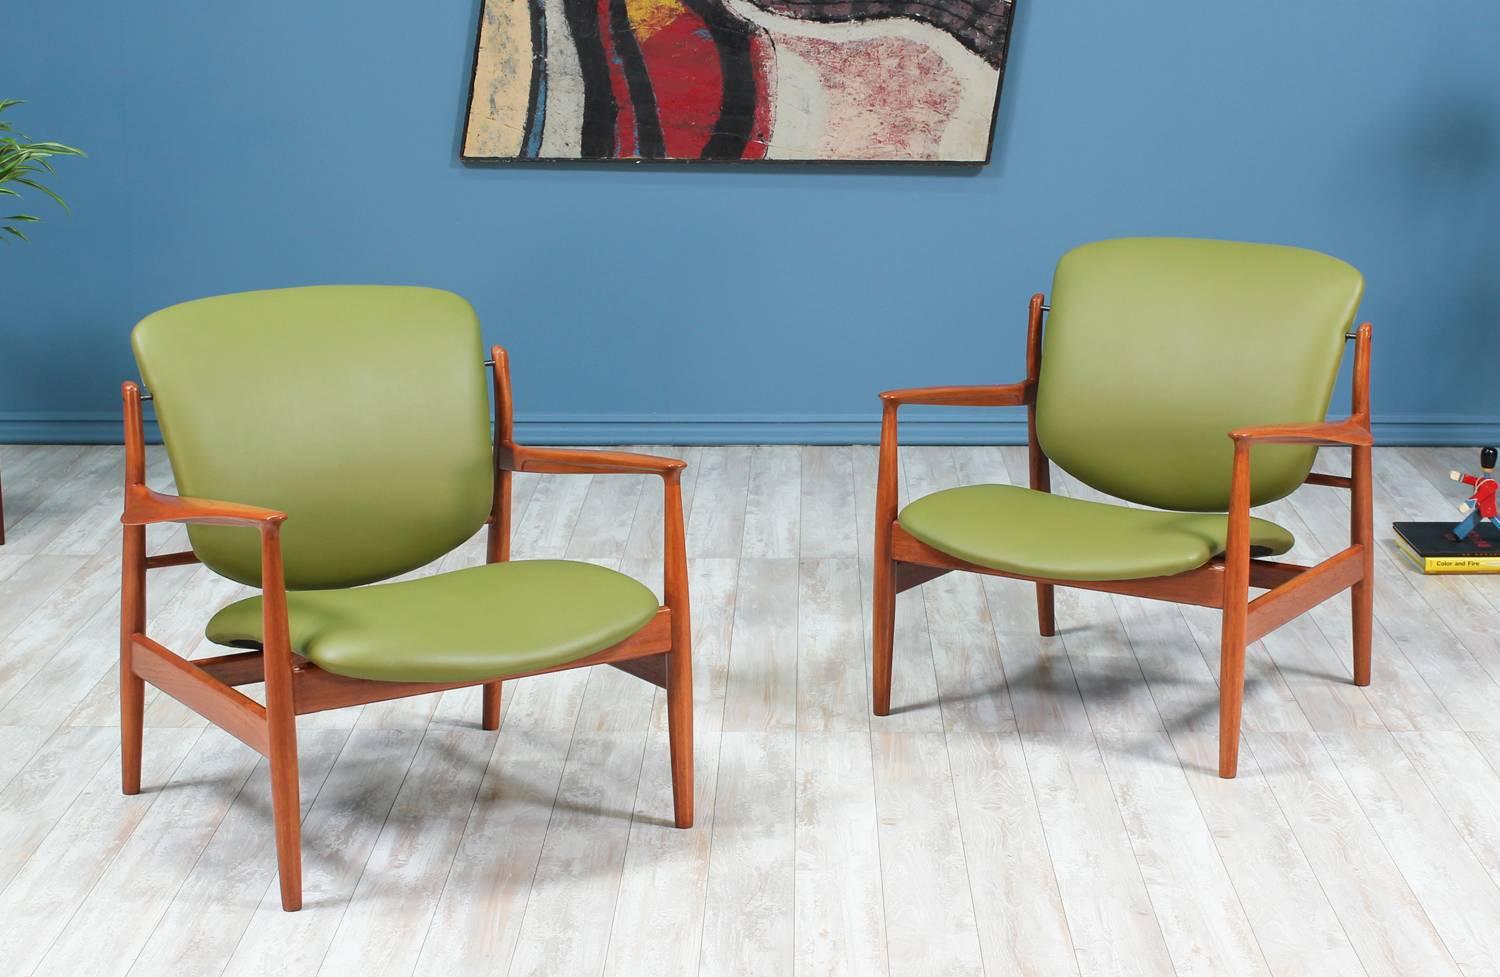 Model FD-136 chairs designed by Finn Juhl for France & Daverkosen in Denmark circa 1950’s. This pair of open wood frame lounge chairs feature a teak structure with sculpted armrests and have been reupholstered with the highest quality grain leather